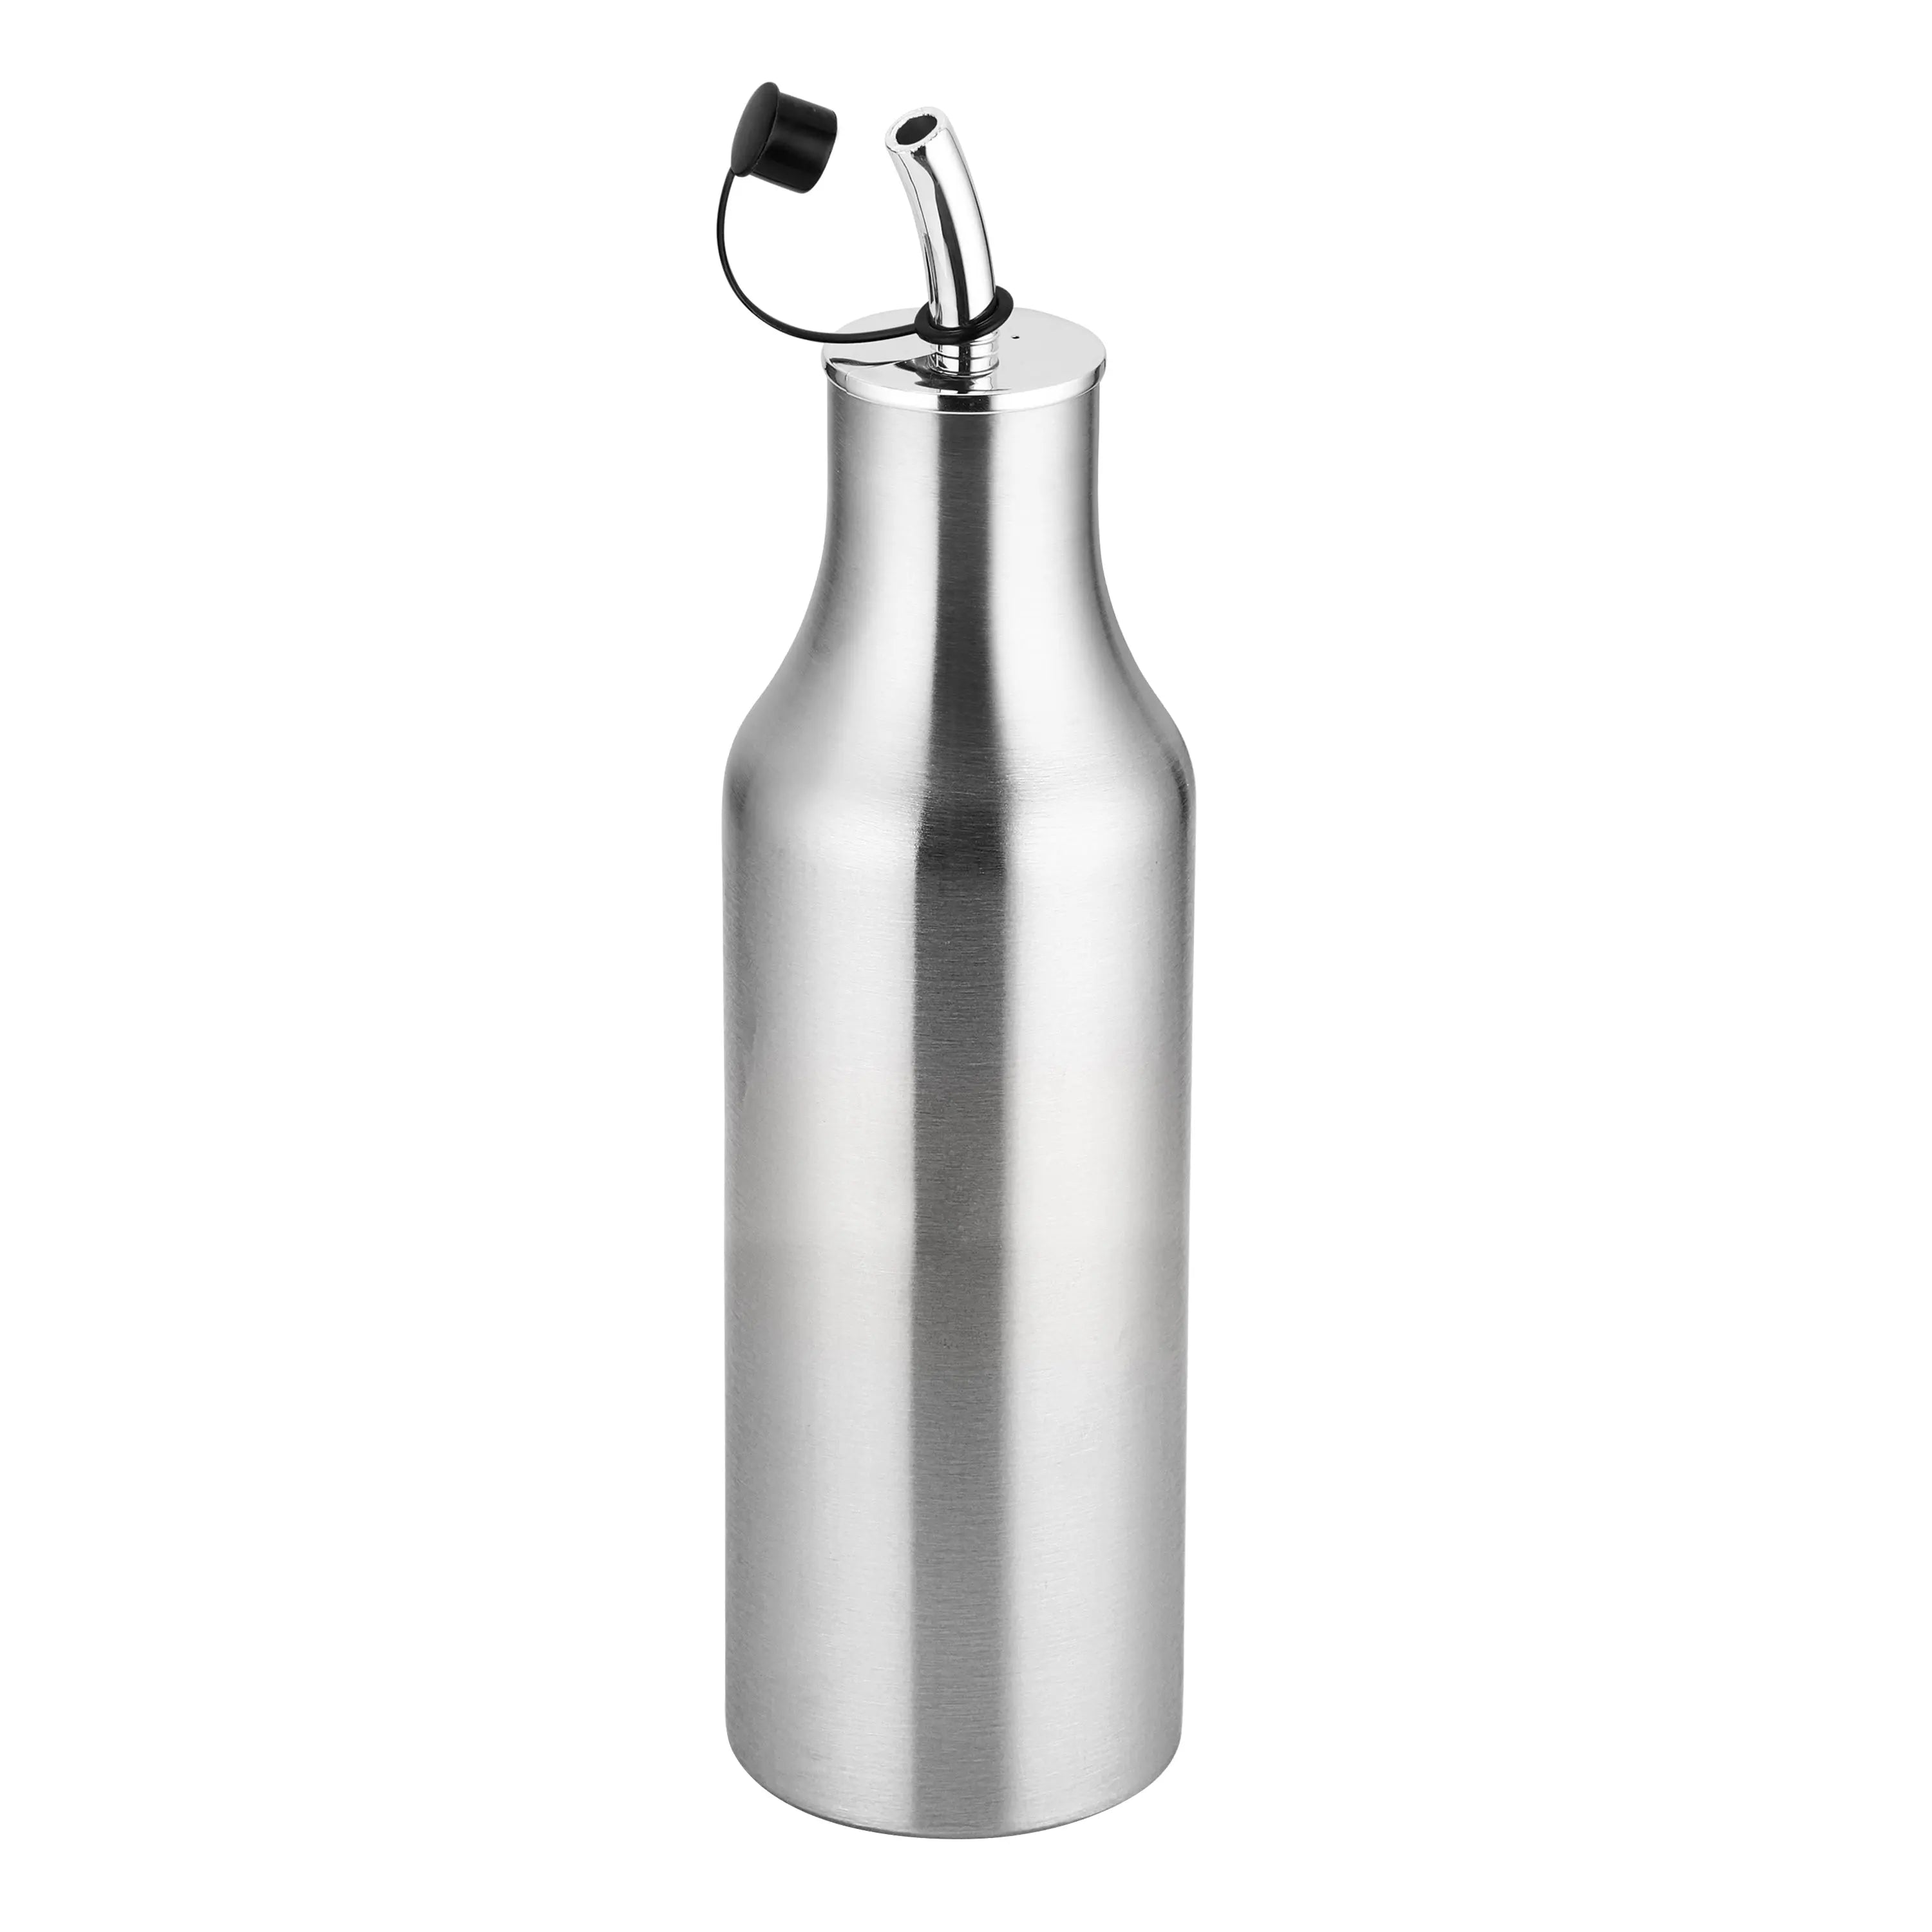 STAINLESS STEEL OIL CAN SIGNATURE - CROCKERY WALA AND COMPANY 